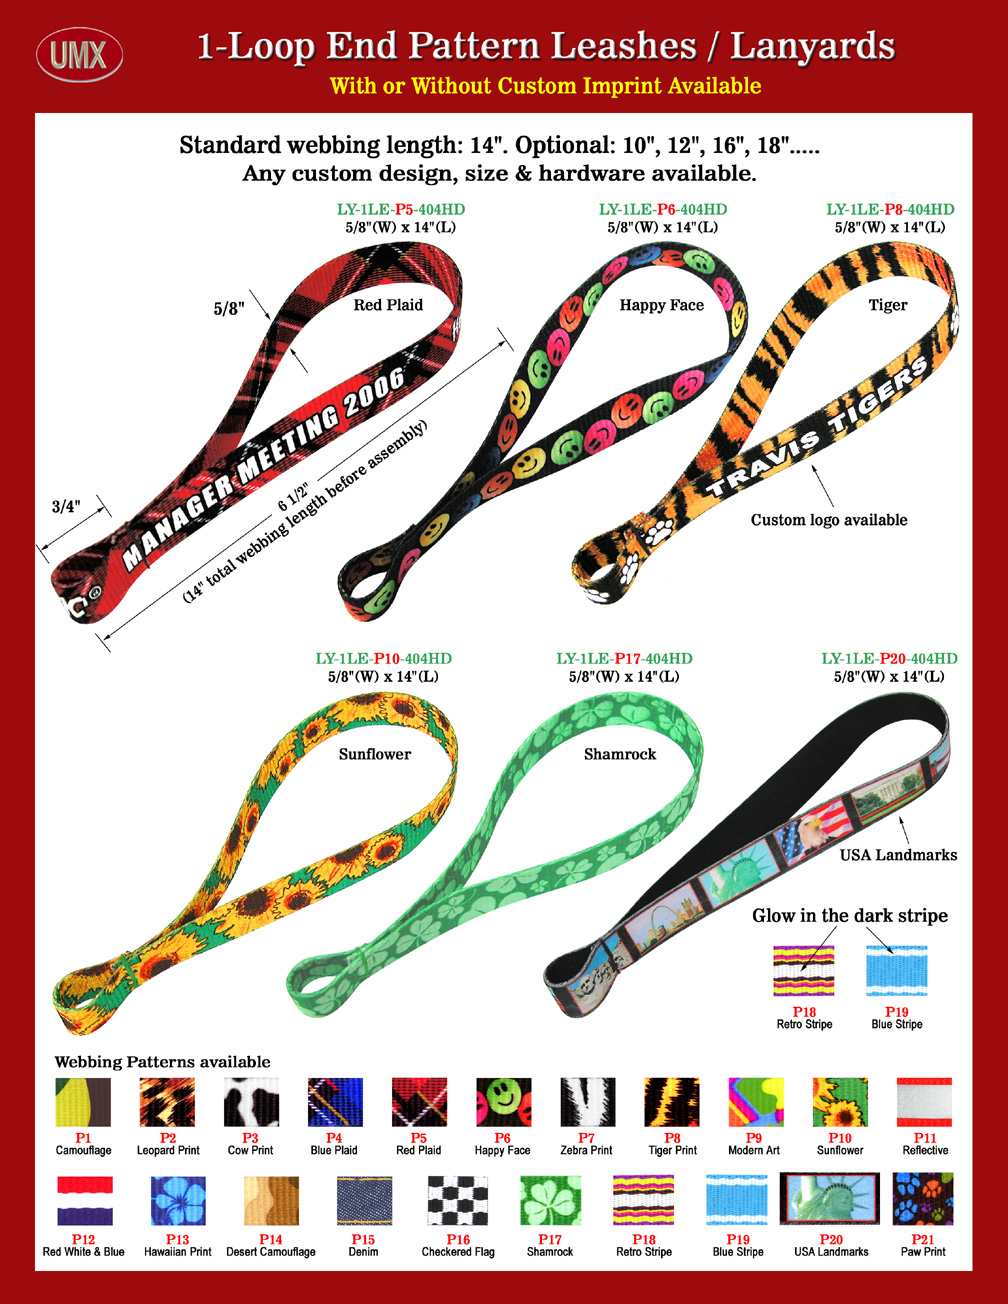 5/8" 1-1oop-End Lanyards - With Pre-printed Pattern Polyester Straps